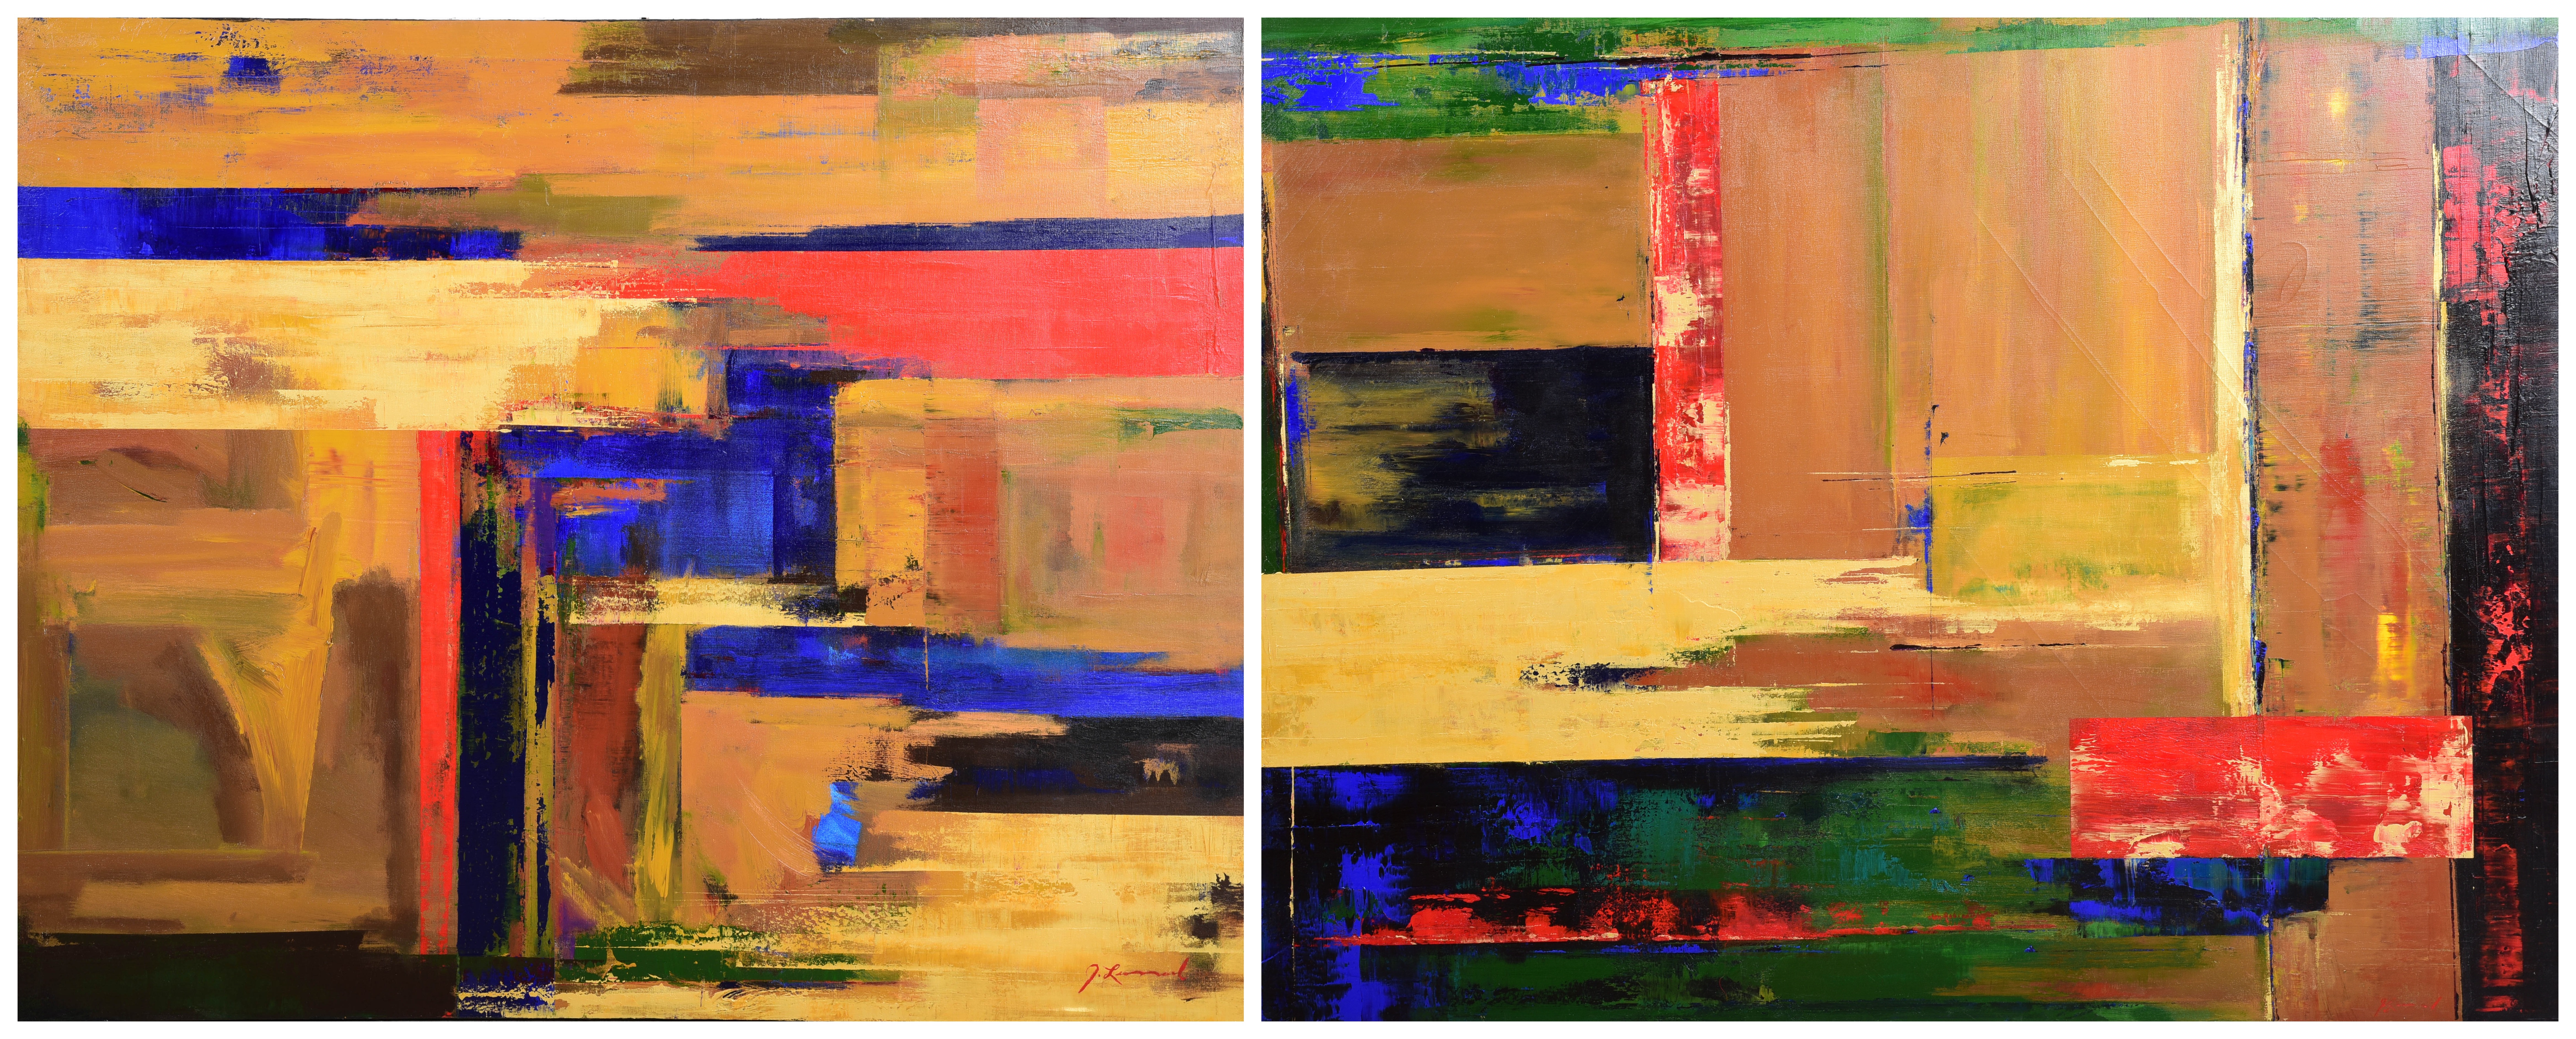 (2) Large format abstract paintings,